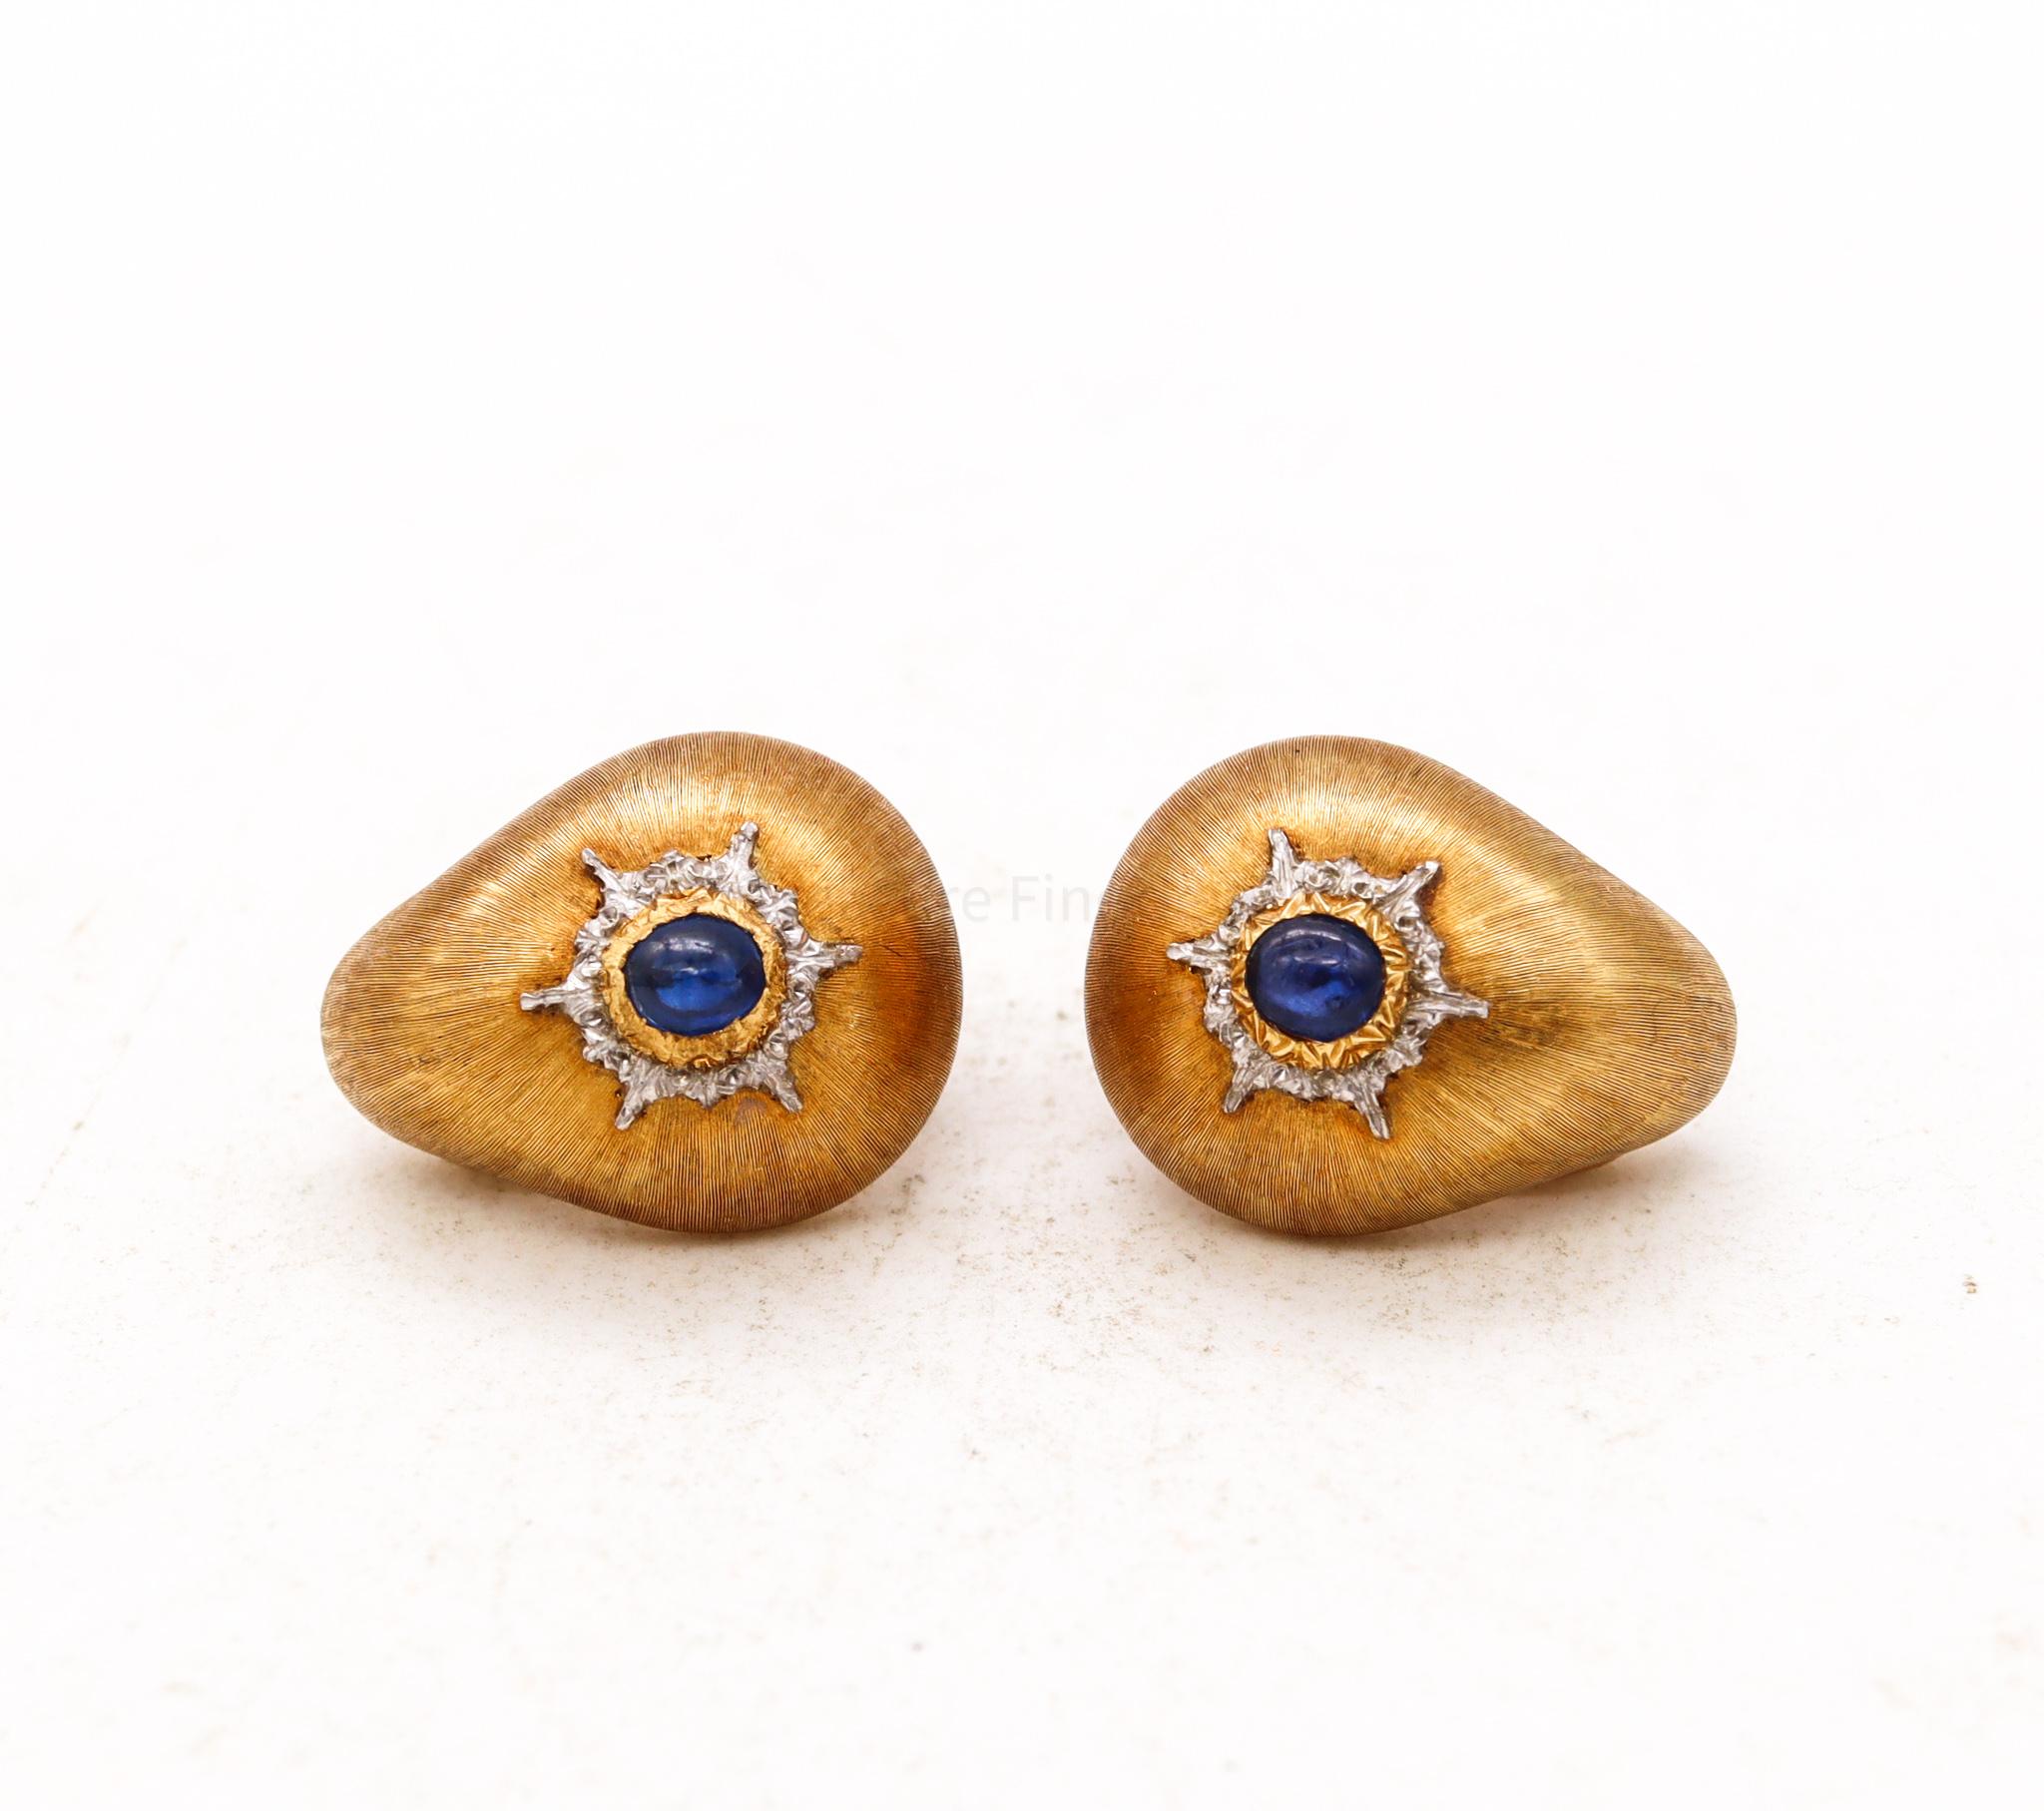 Cushion Cut Buccellati Milano Cushioned Clips Earrings 18Kt Gold with Ceylon Blue Sapphires